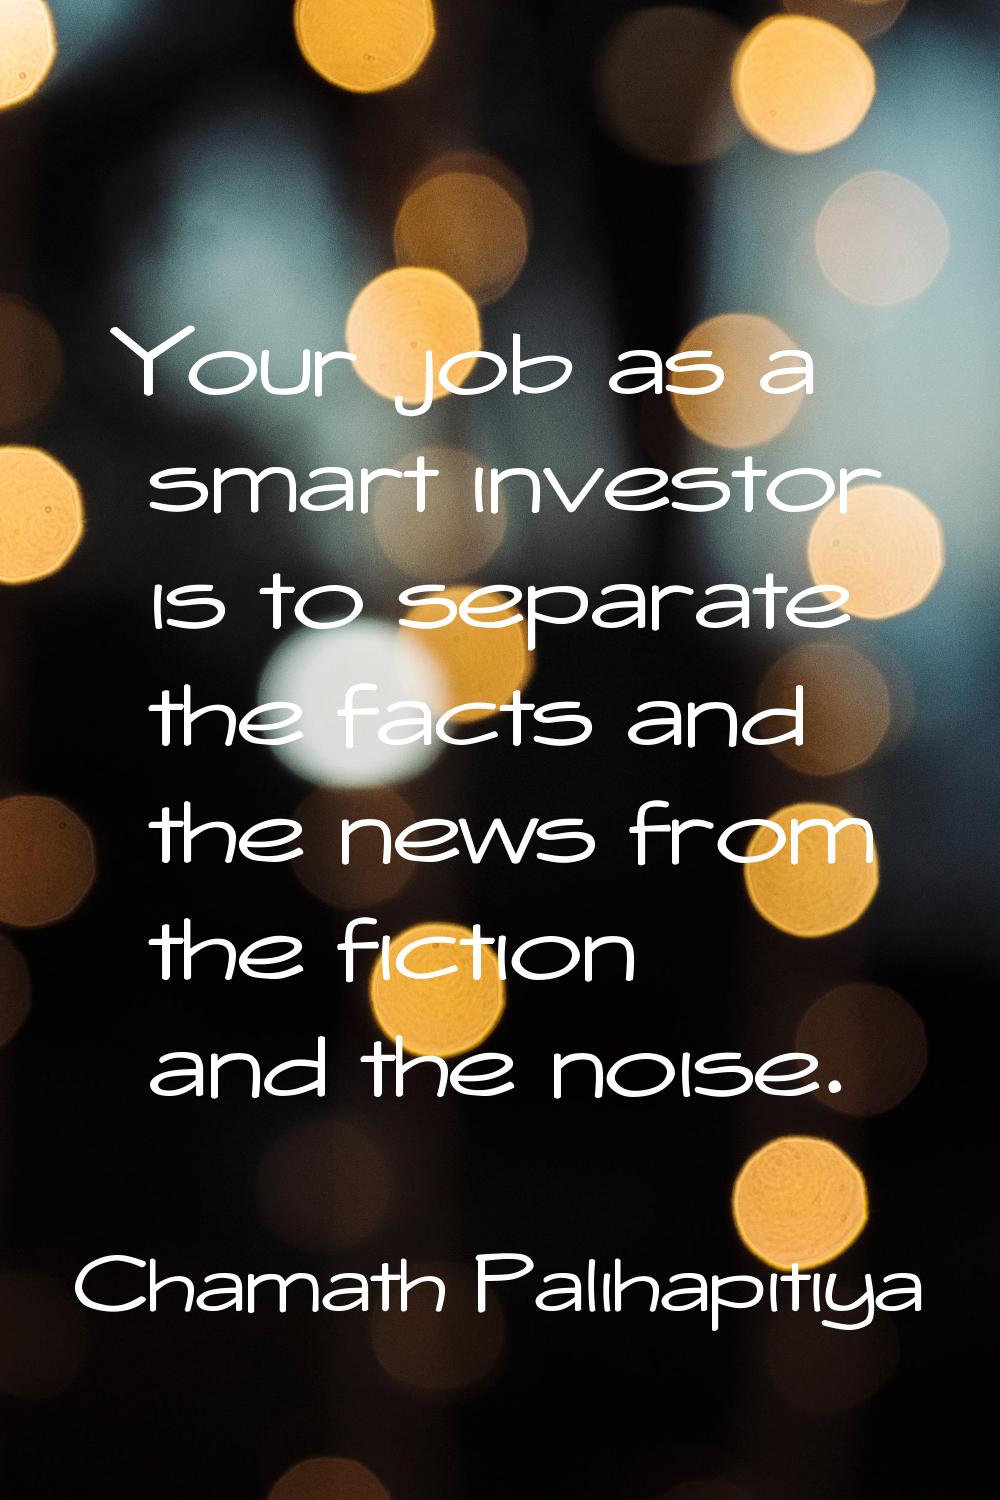 Your job as a smart investor is to separate the facts and the news from the fiction and the noise.